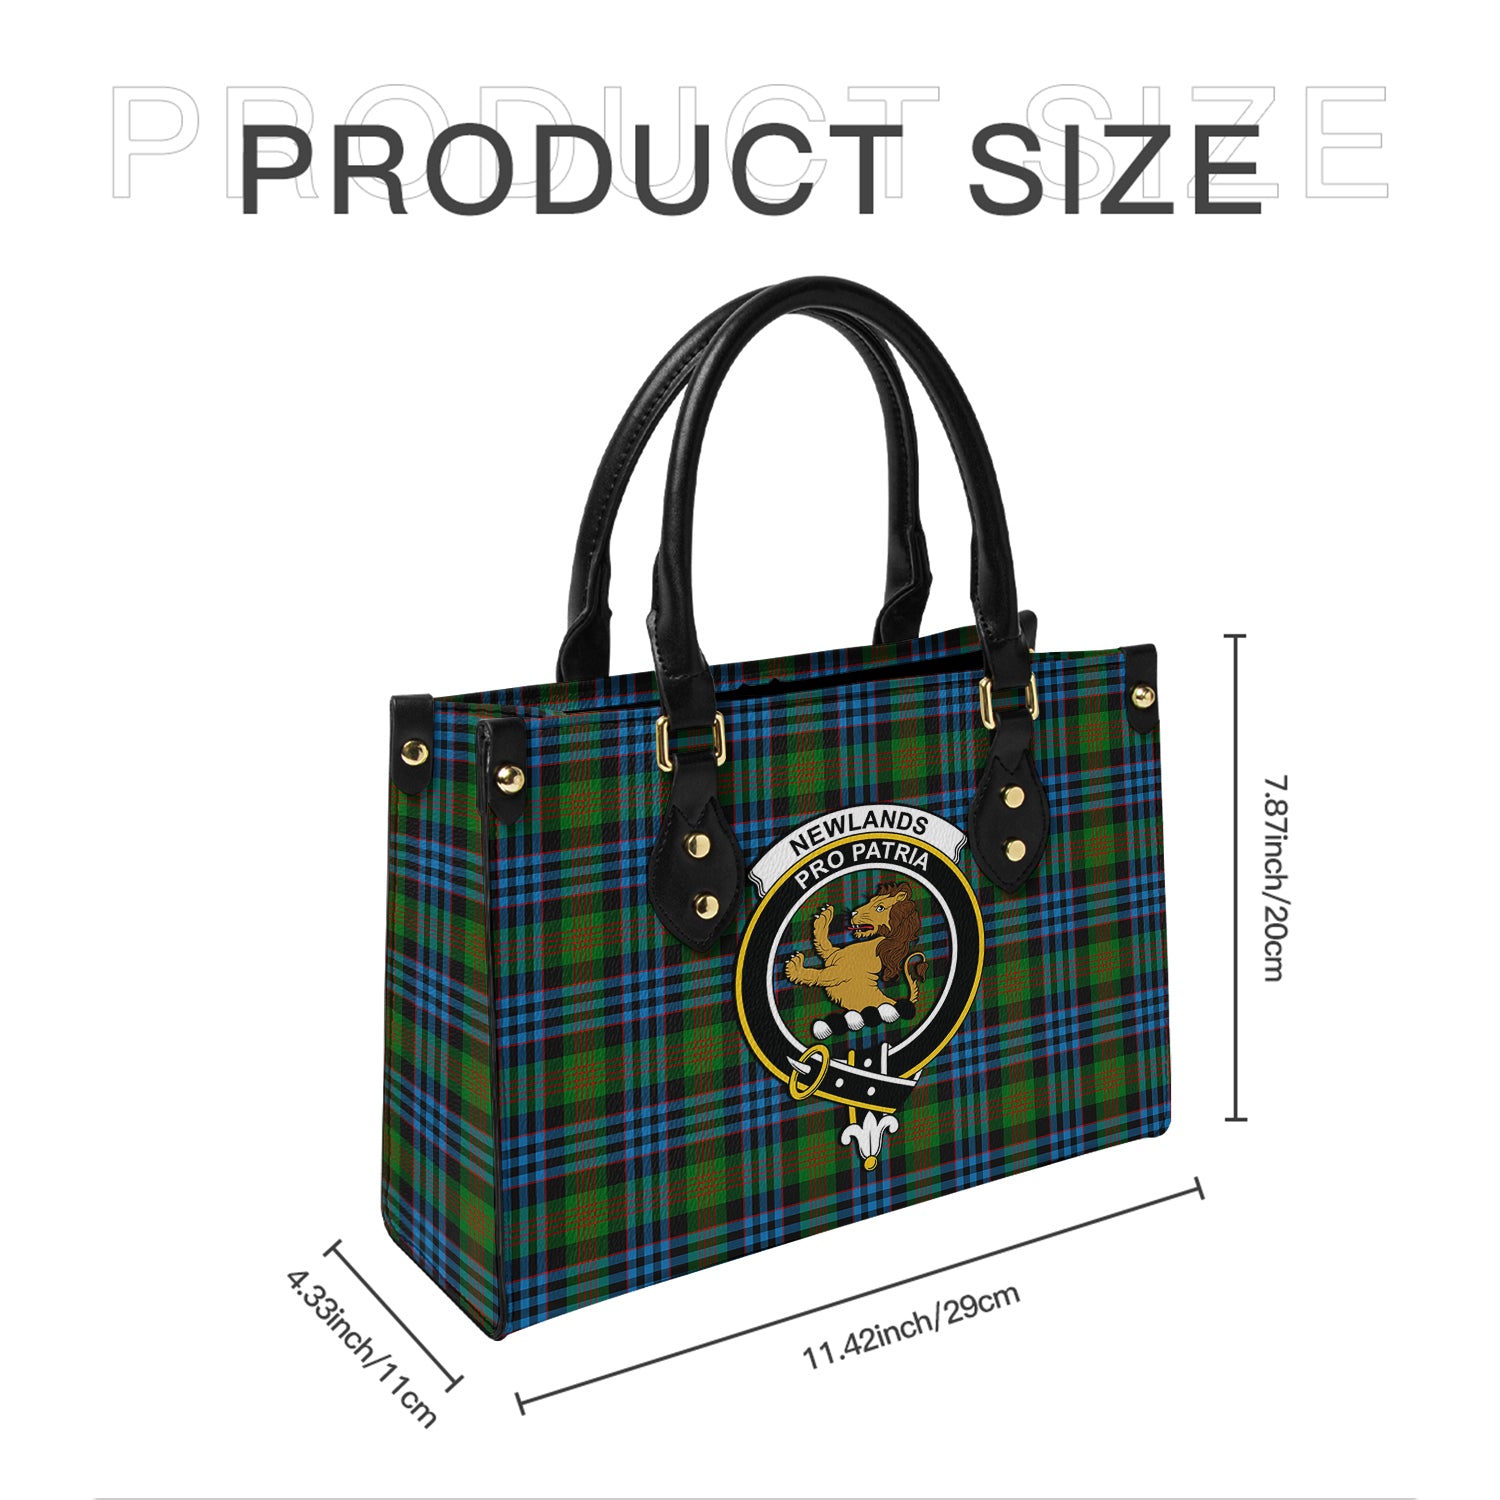 newlands-of-lauriston-tartan-leather-bag-with-family-crest